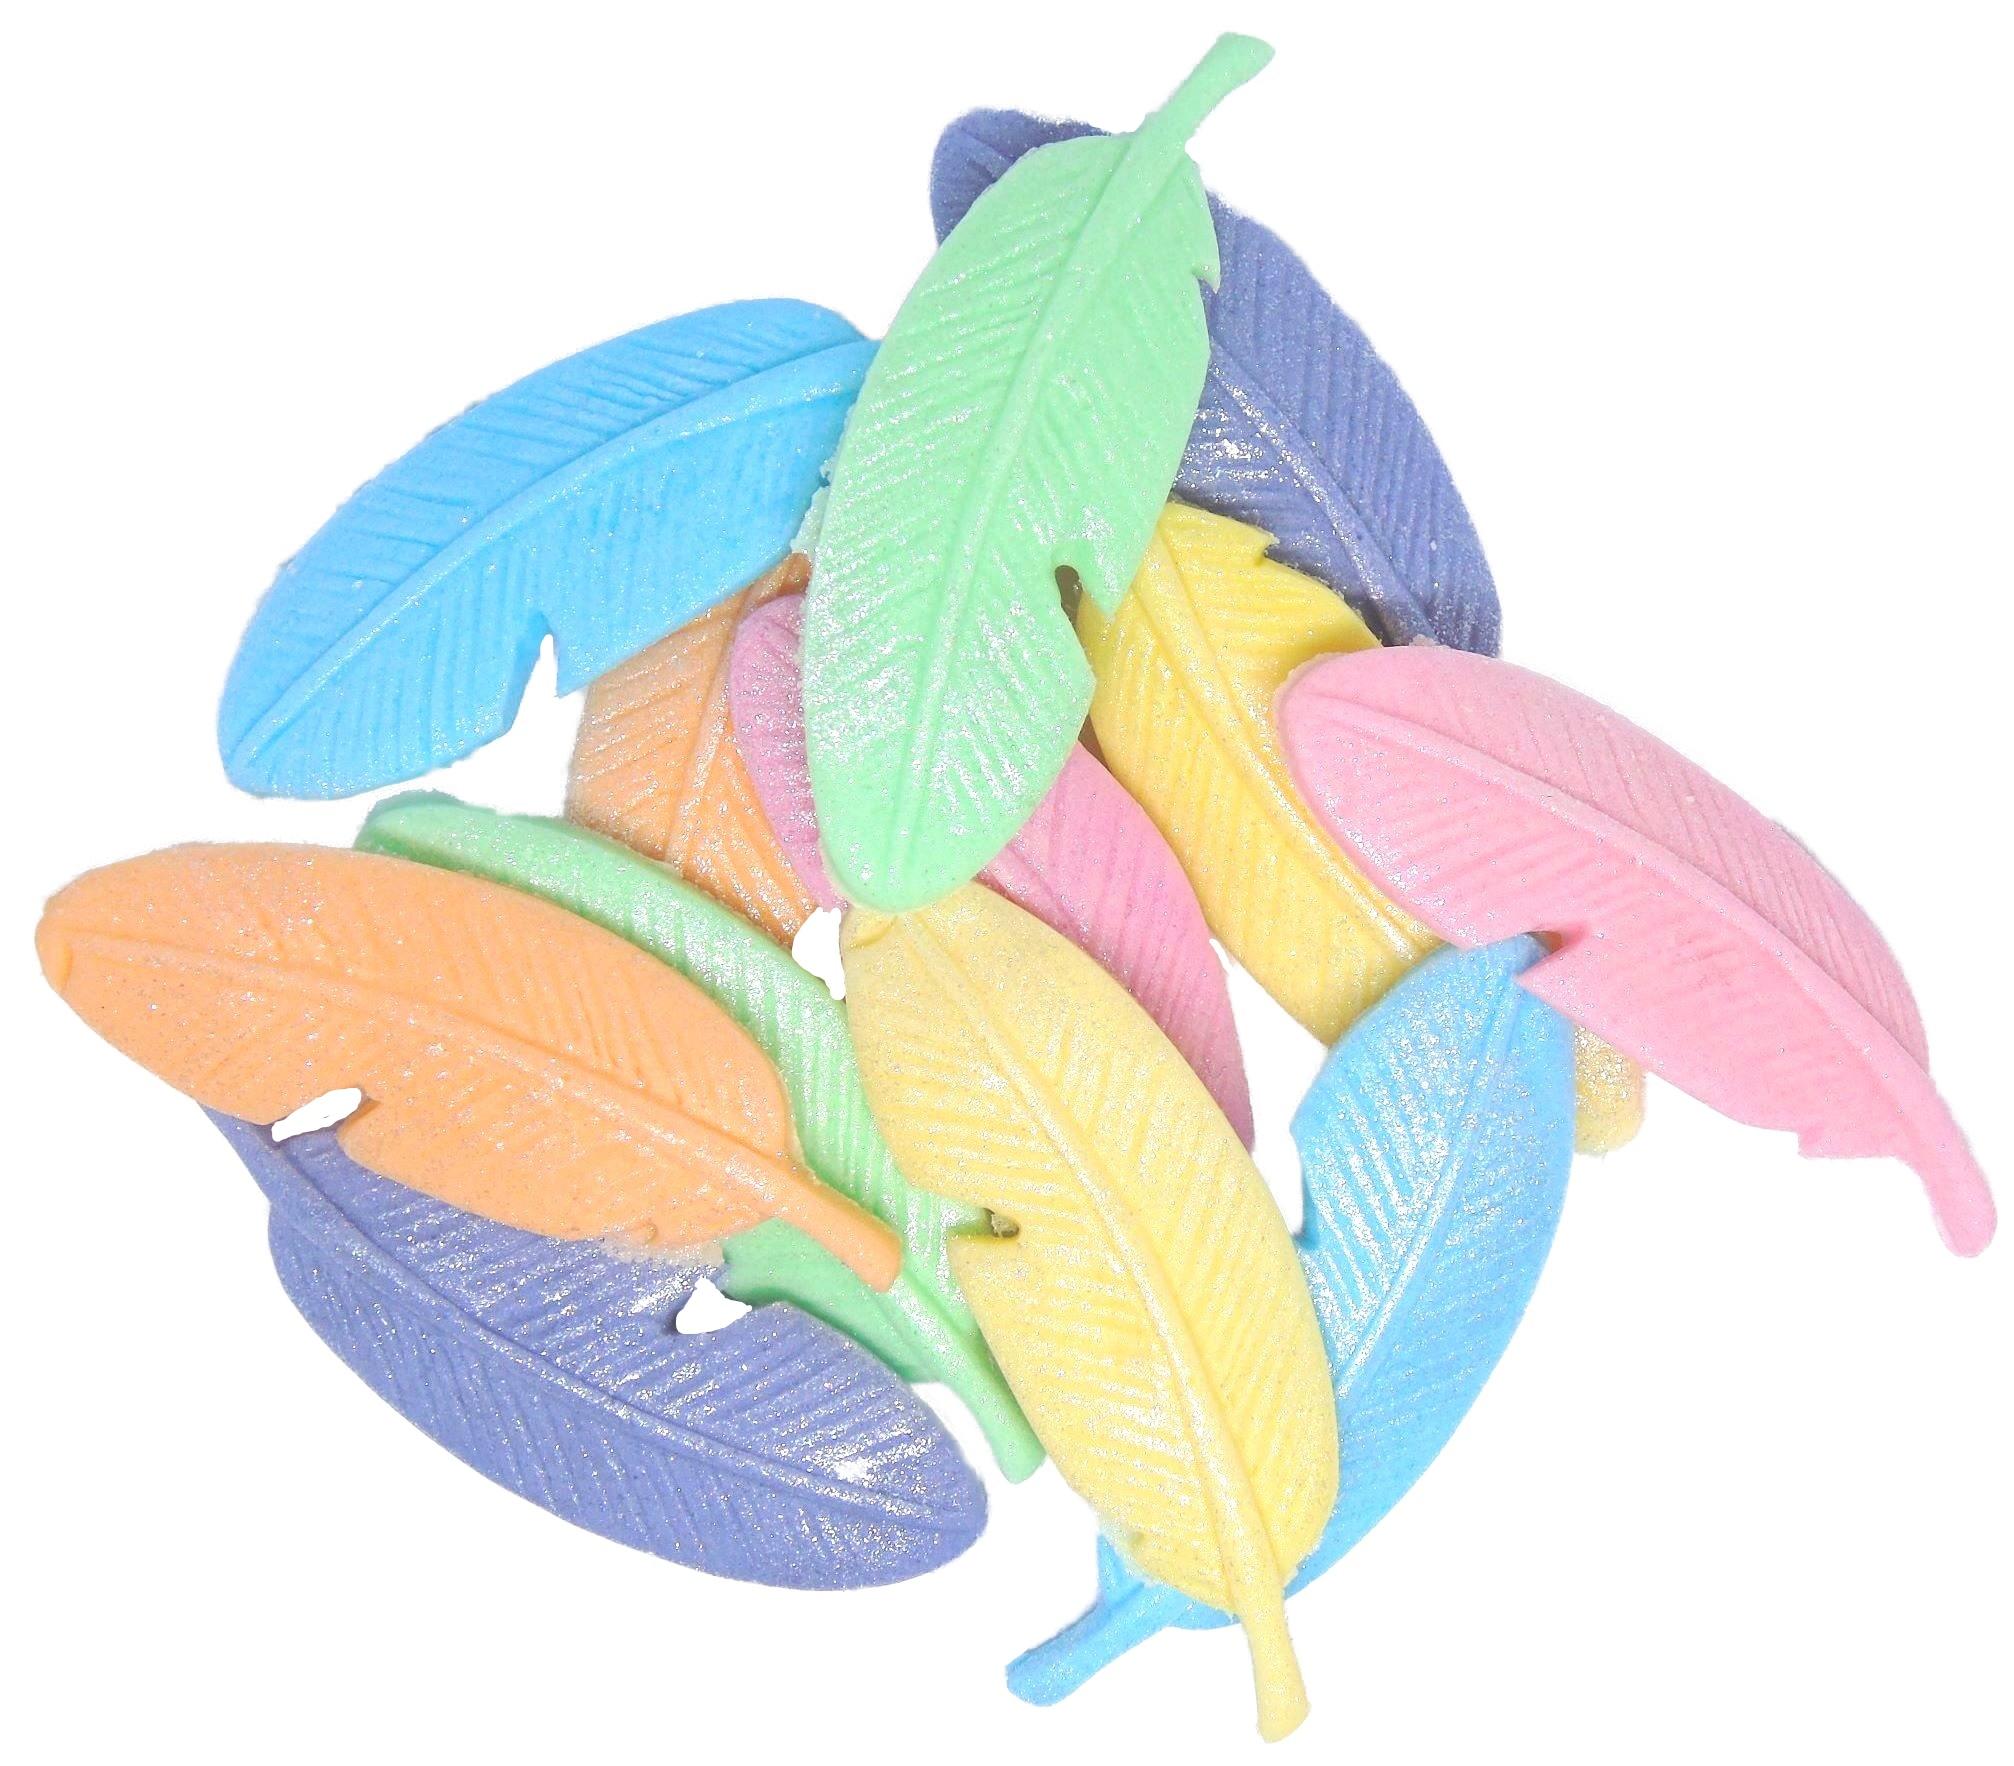 12 Edible  Mixed Coloured Glittered Feathers Vegan Cupcake Toppers